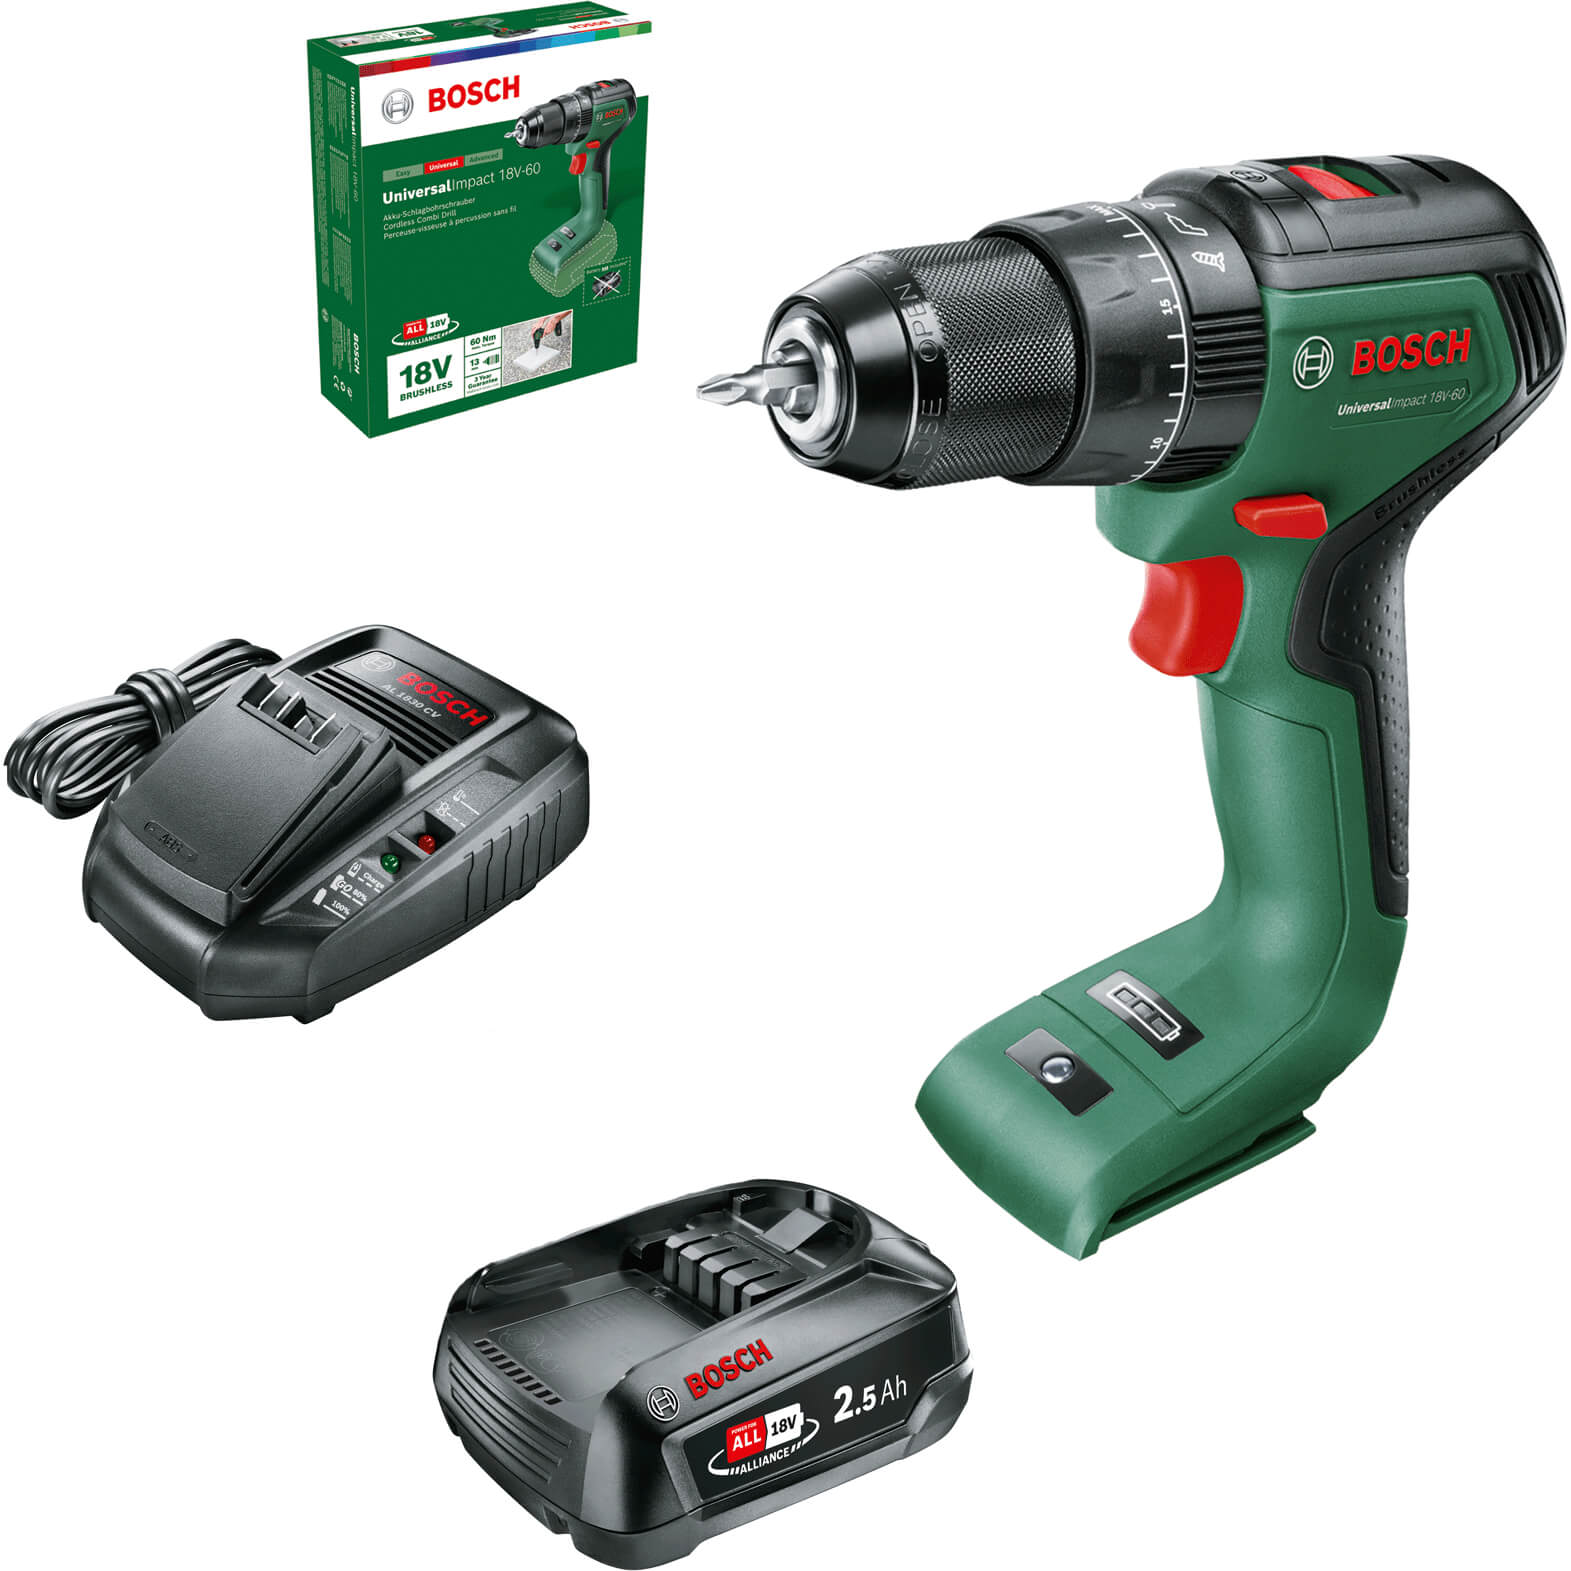 Image of Bosch UNIVERSALIMPACT 18V-60 18v Cordless Brushless Combi Drill 1 x 2.5ah Li-ion Charger No Case